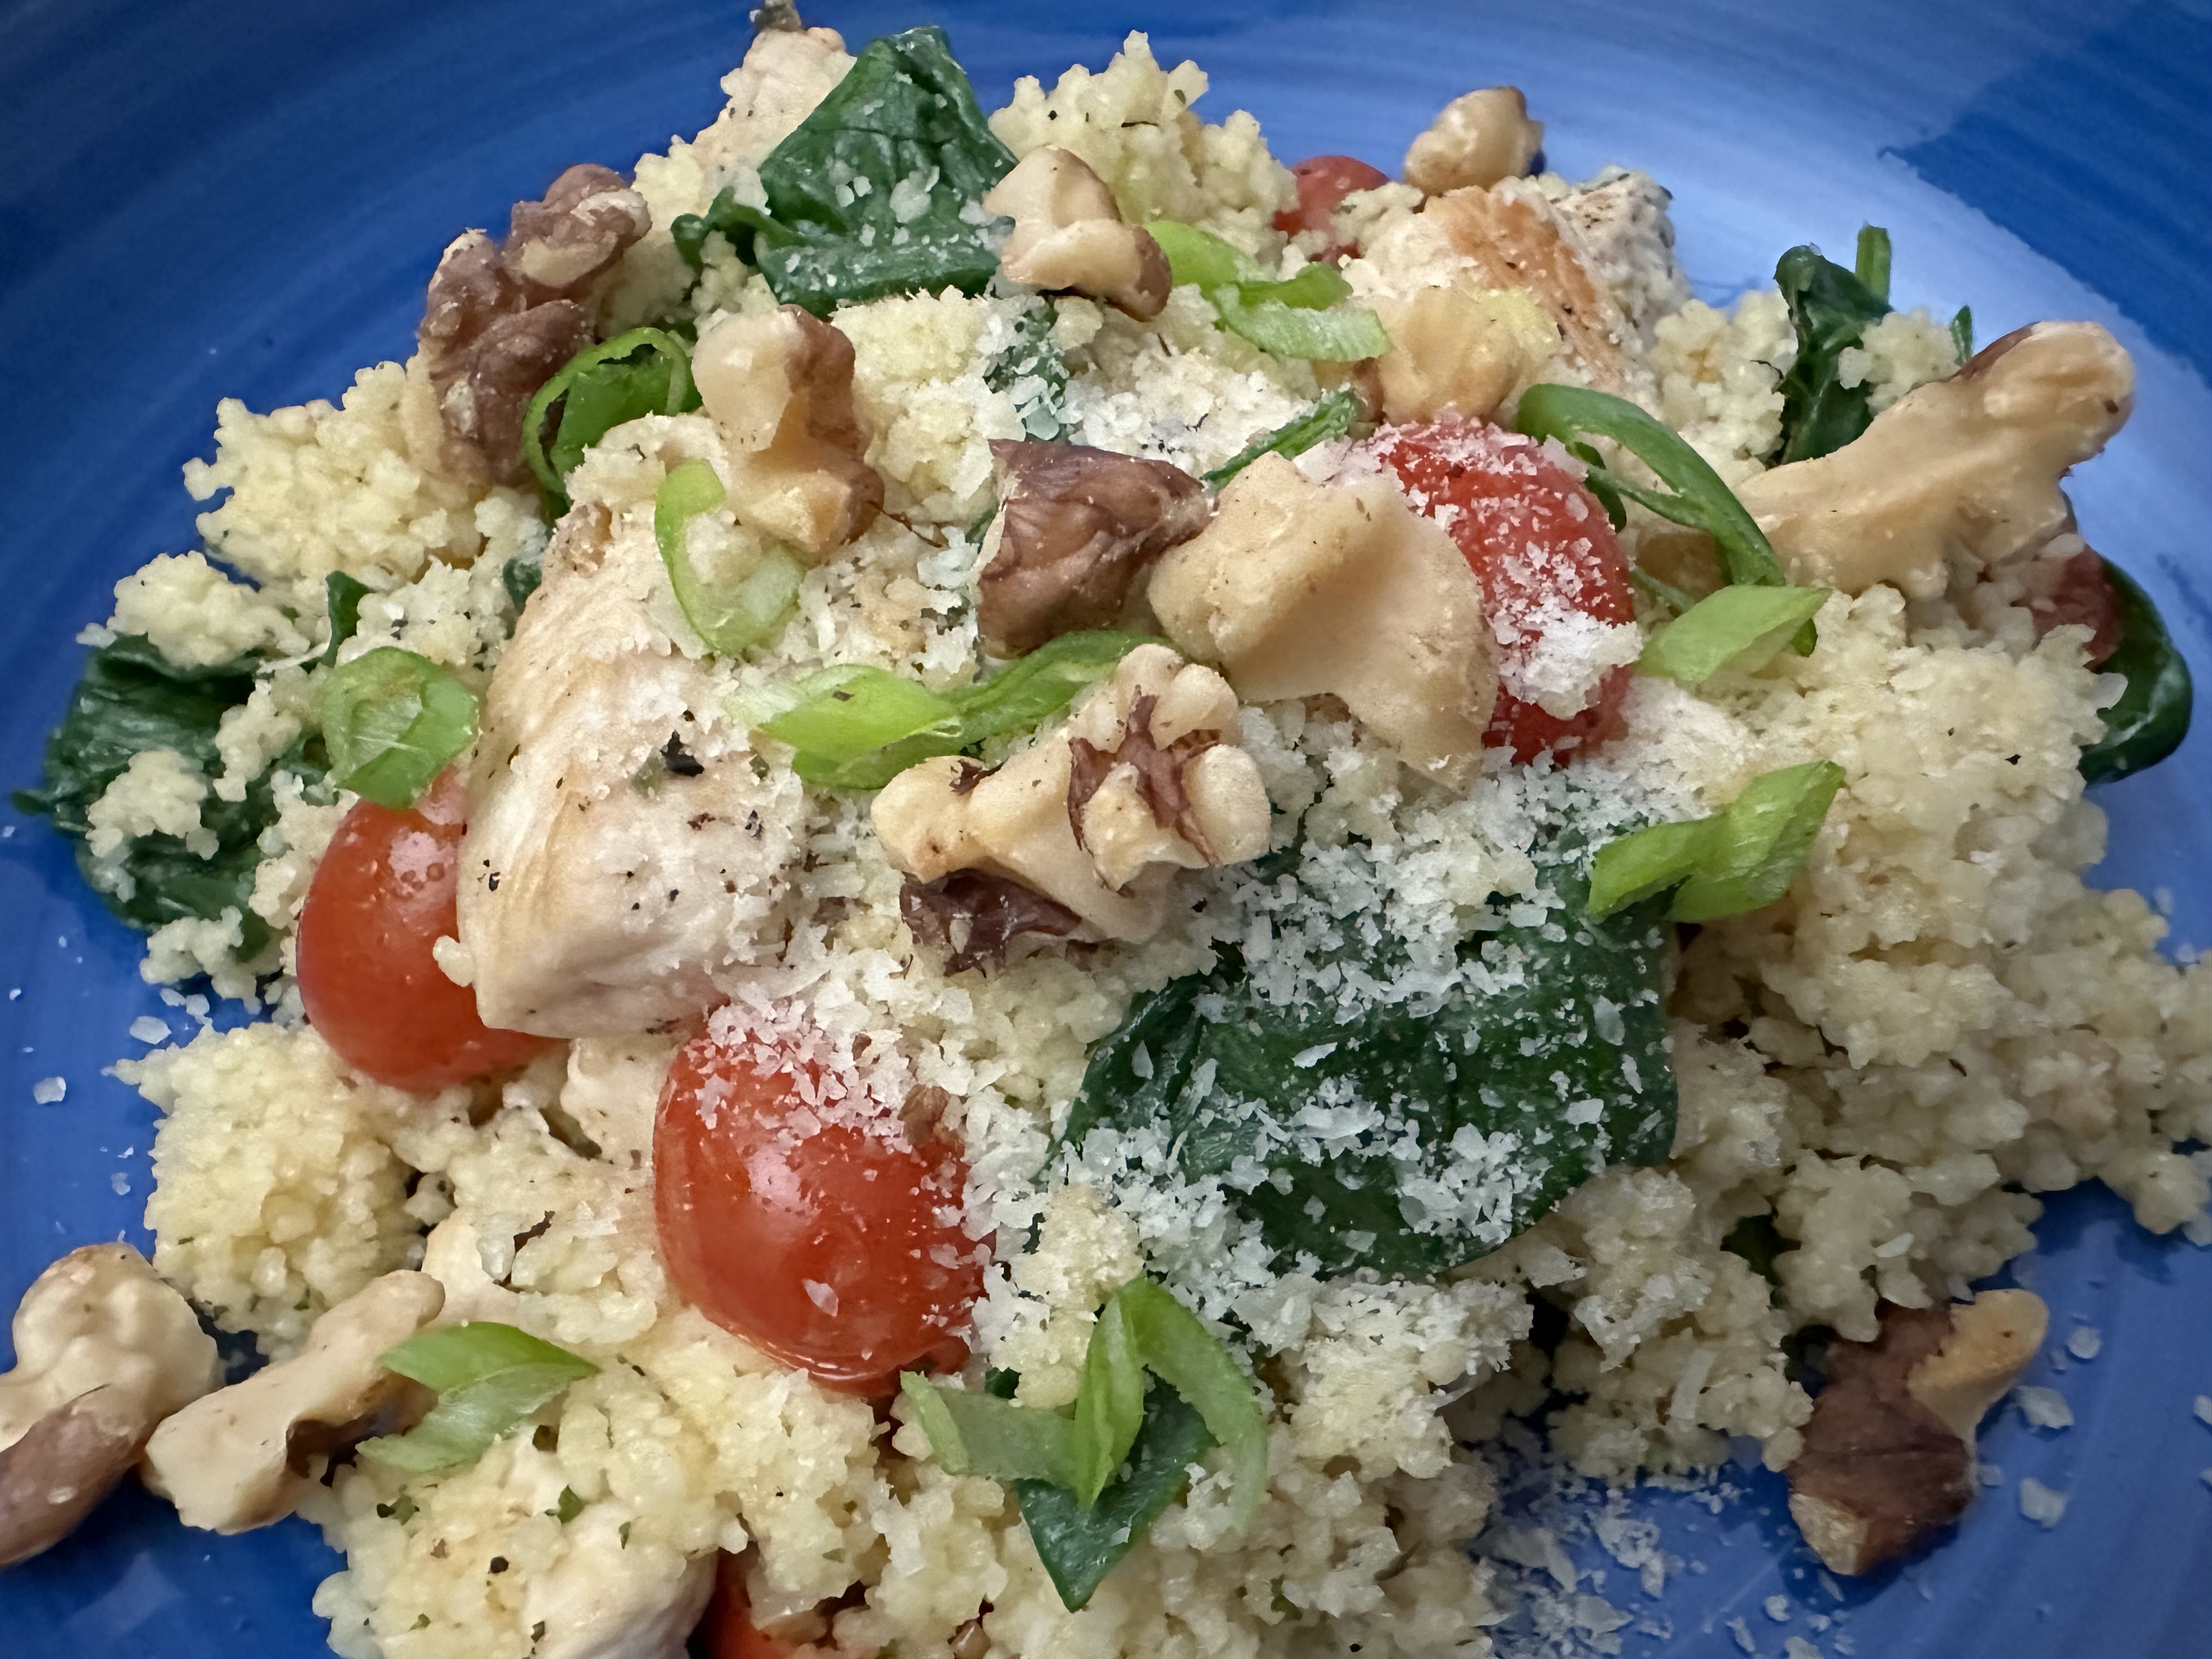 Parmesan Chicken Couscous with spinach, cherry tomatoes, and toasted walnuts.